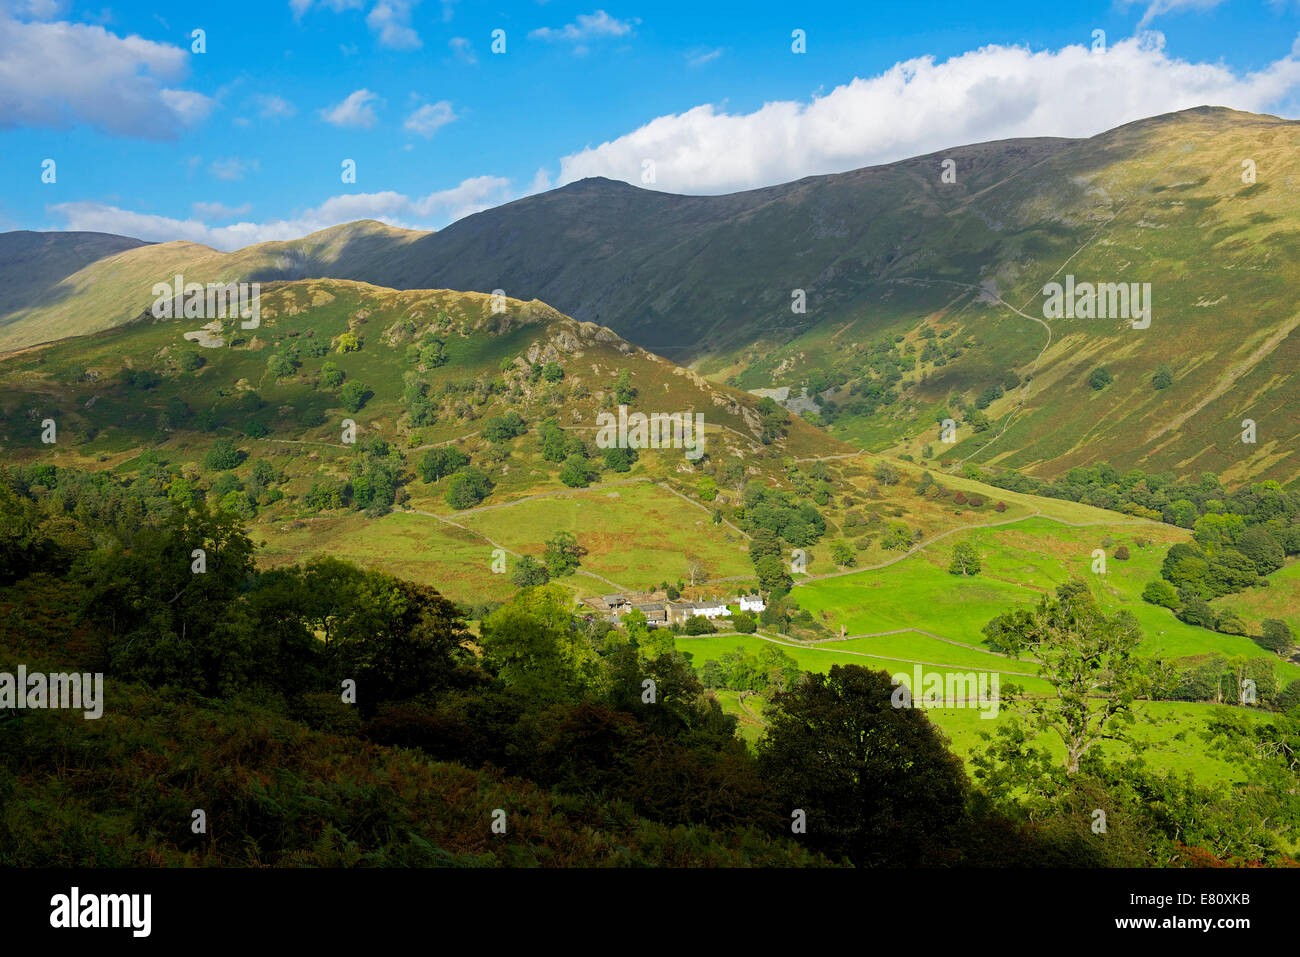 Troutbeck Park Farm, in the Troutbeck Valley, Lake District National Park, Cumbria, England UK Stock Photo